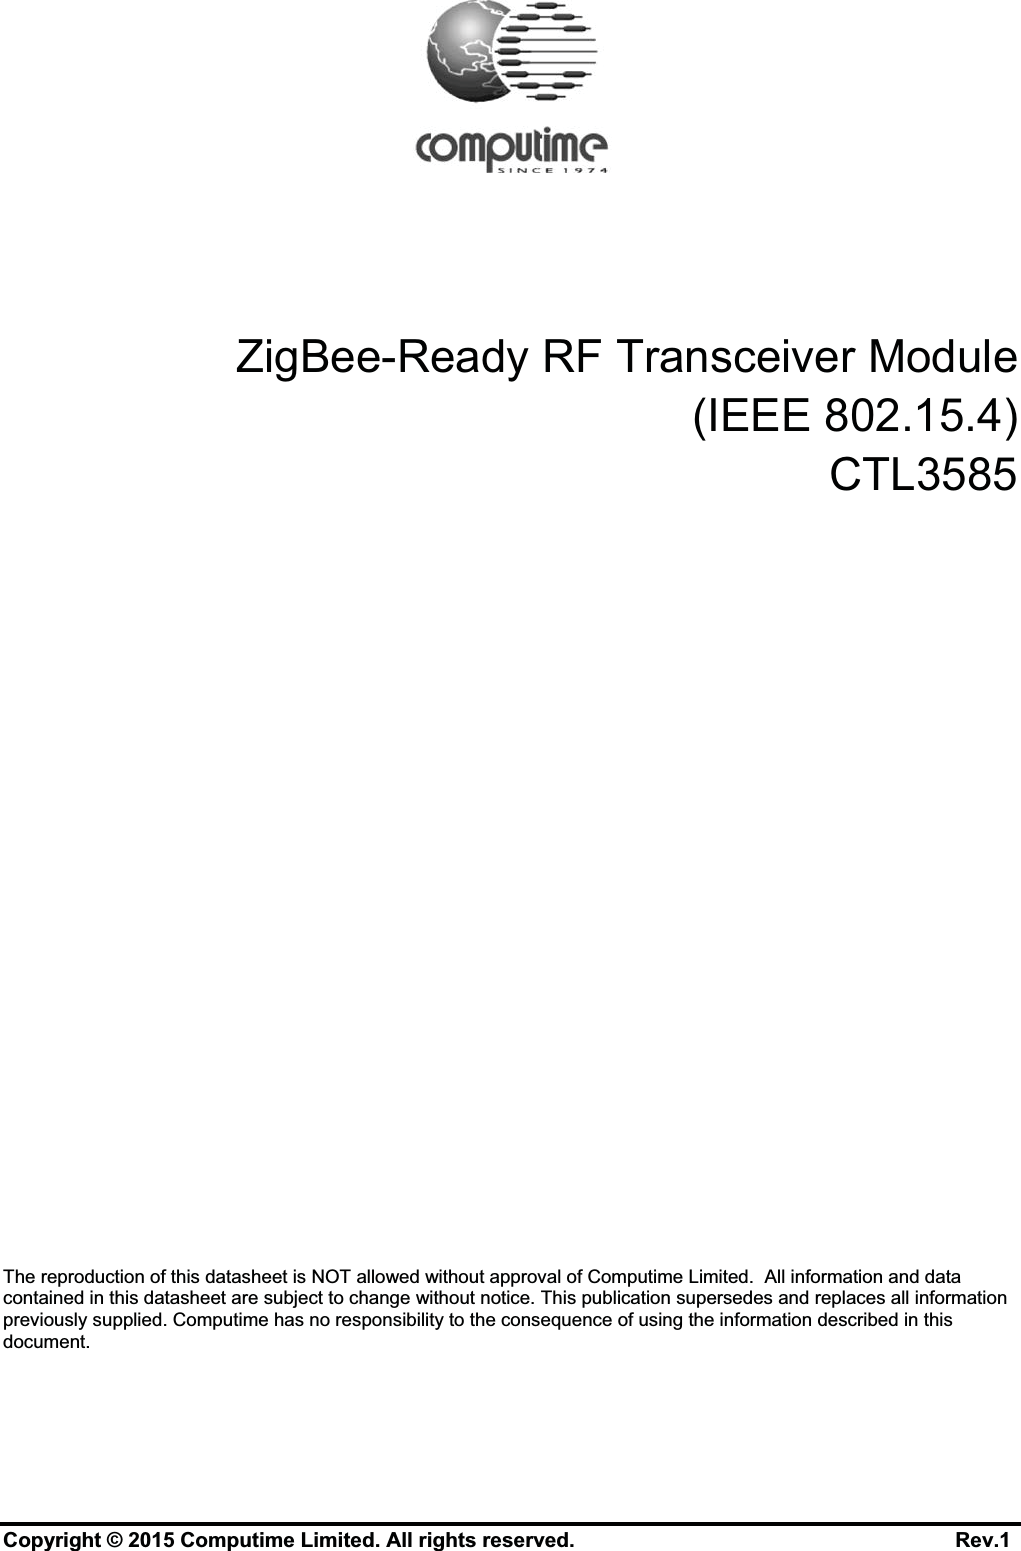 ZigBee-Ready RF Transceiver Module(IEEE 802.15.4)CTL3585The reproduction of this datasheet is NOT allowed without approval of Computime Limited.  All information and data contained in this datasheet are subject to change without notice. This publication supersedes and replaces all information previously supplied. Computime has no responsibility to the consequence of using the information described in this document.Copyright © 2015 Computime Limited. All rights reserved.                                                      Rev.1